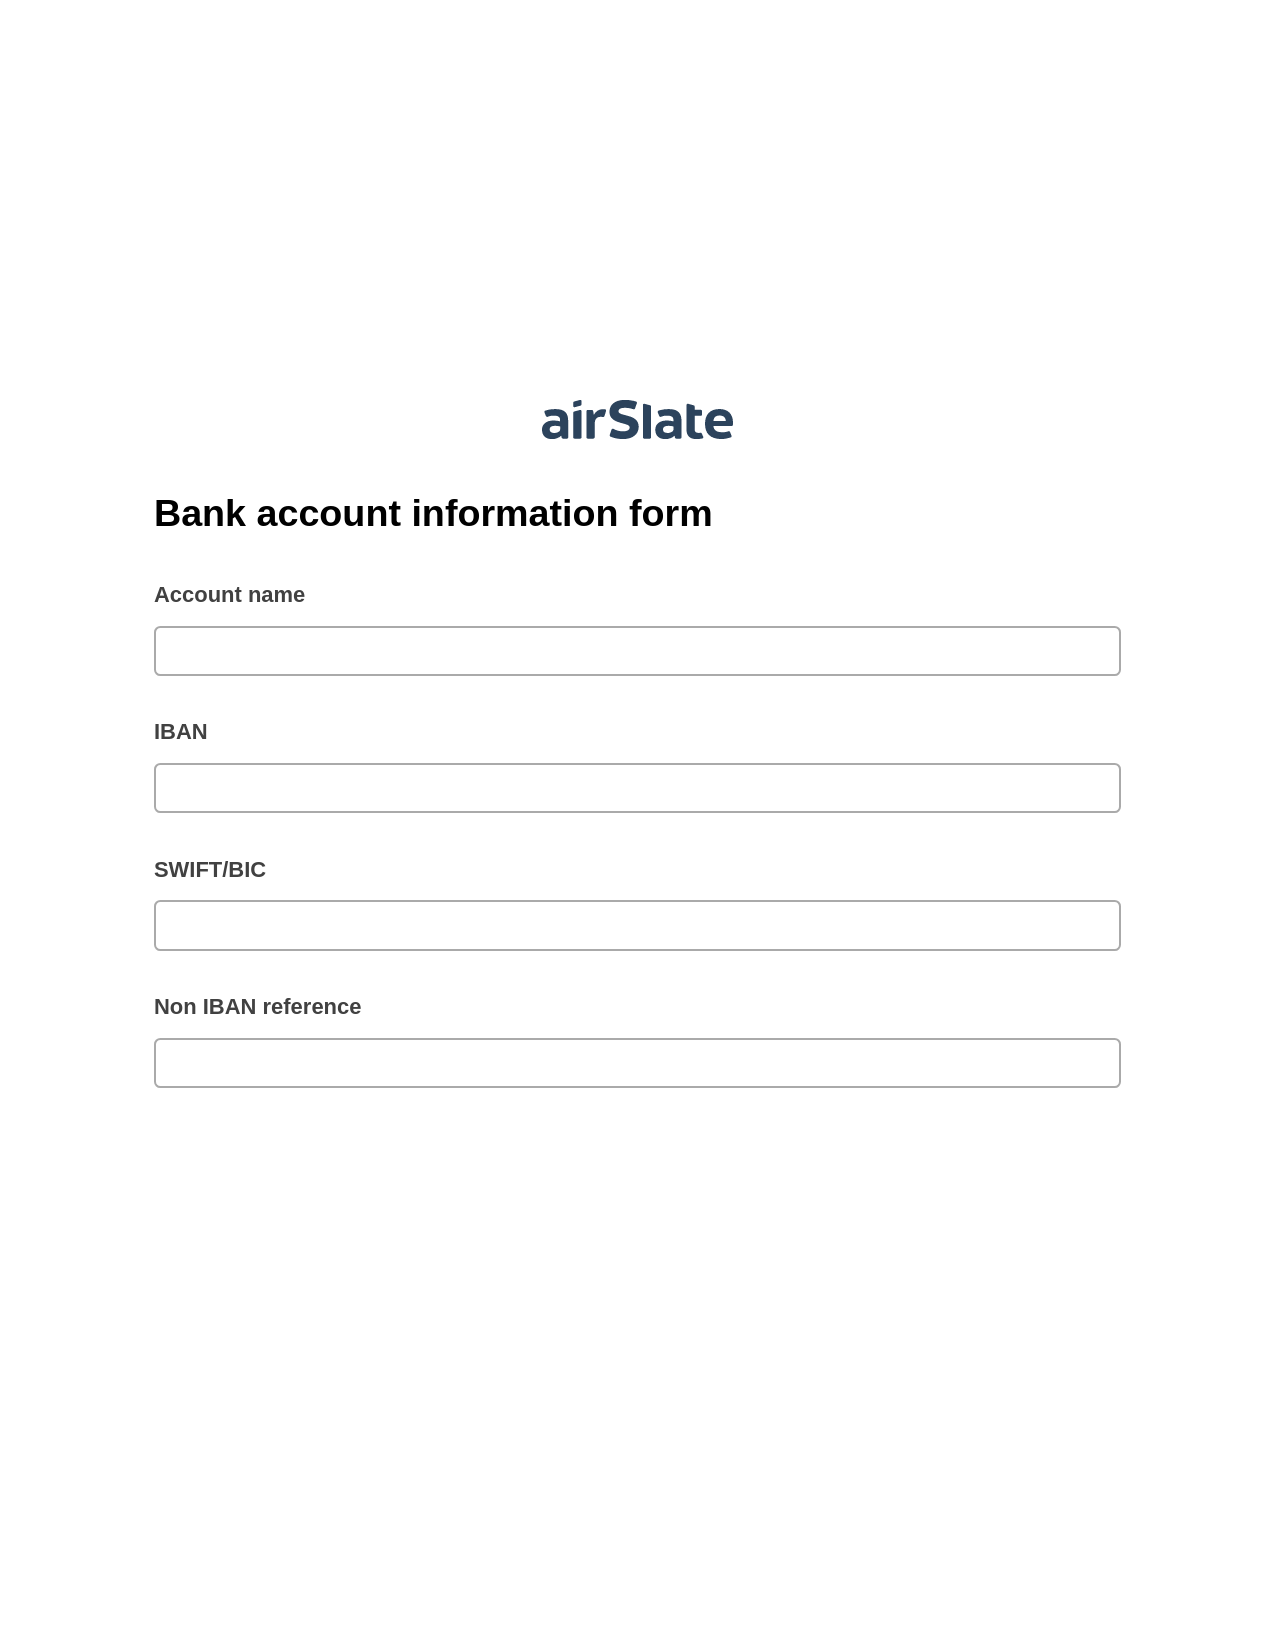 Bank account information form Pre-fill Dropdown from Airtable, Export to MS Dynamics 365 Bot, OneDrive Bot